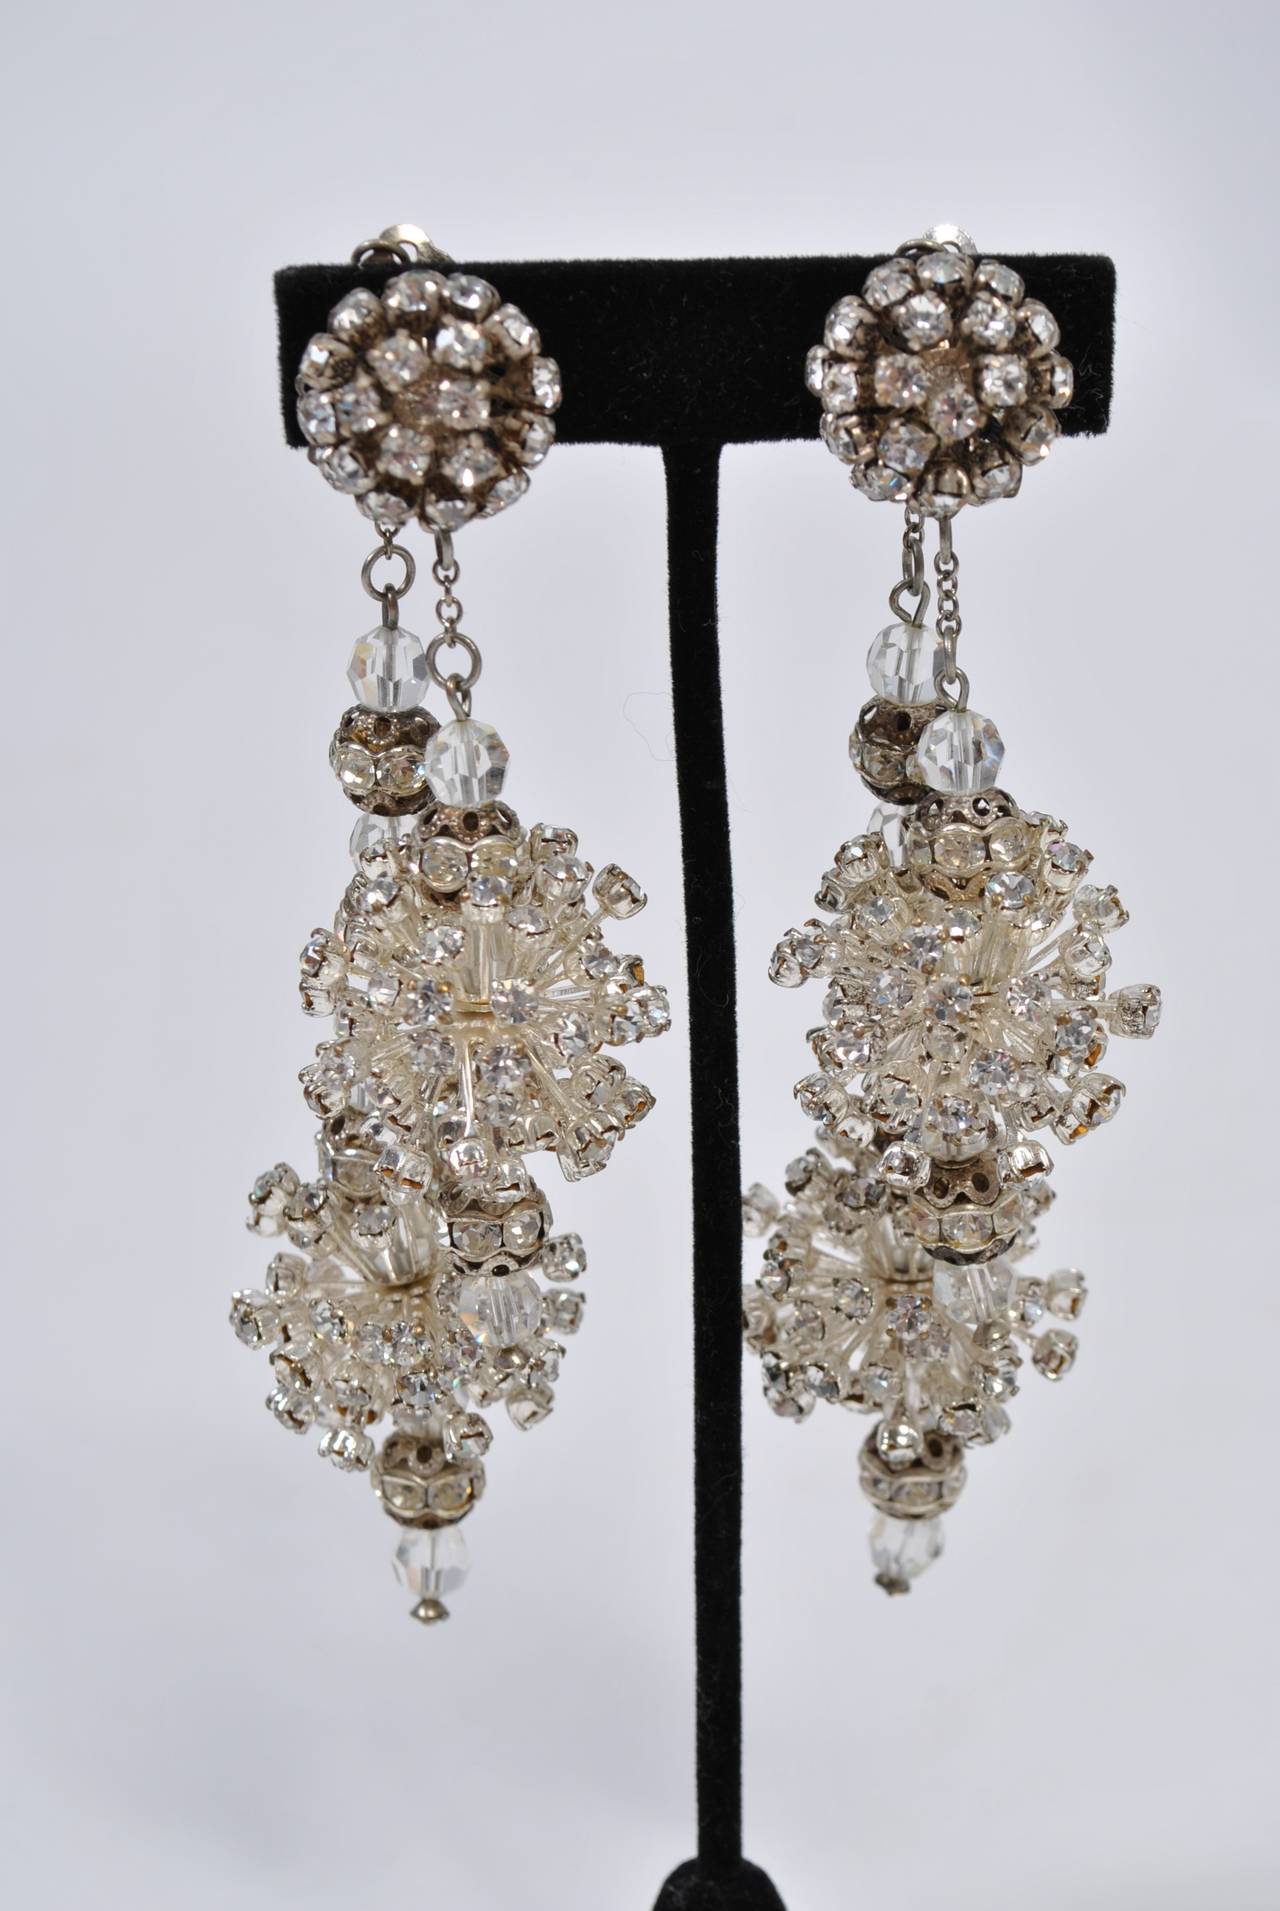 This striking pair of long rhinestone earrings will dramatize even the most simple  evening ensemble. At the earlobe is a round clip-on of small rhinestones that anchors two long drops, one that hangs in front of the ear and a longer one behind it.